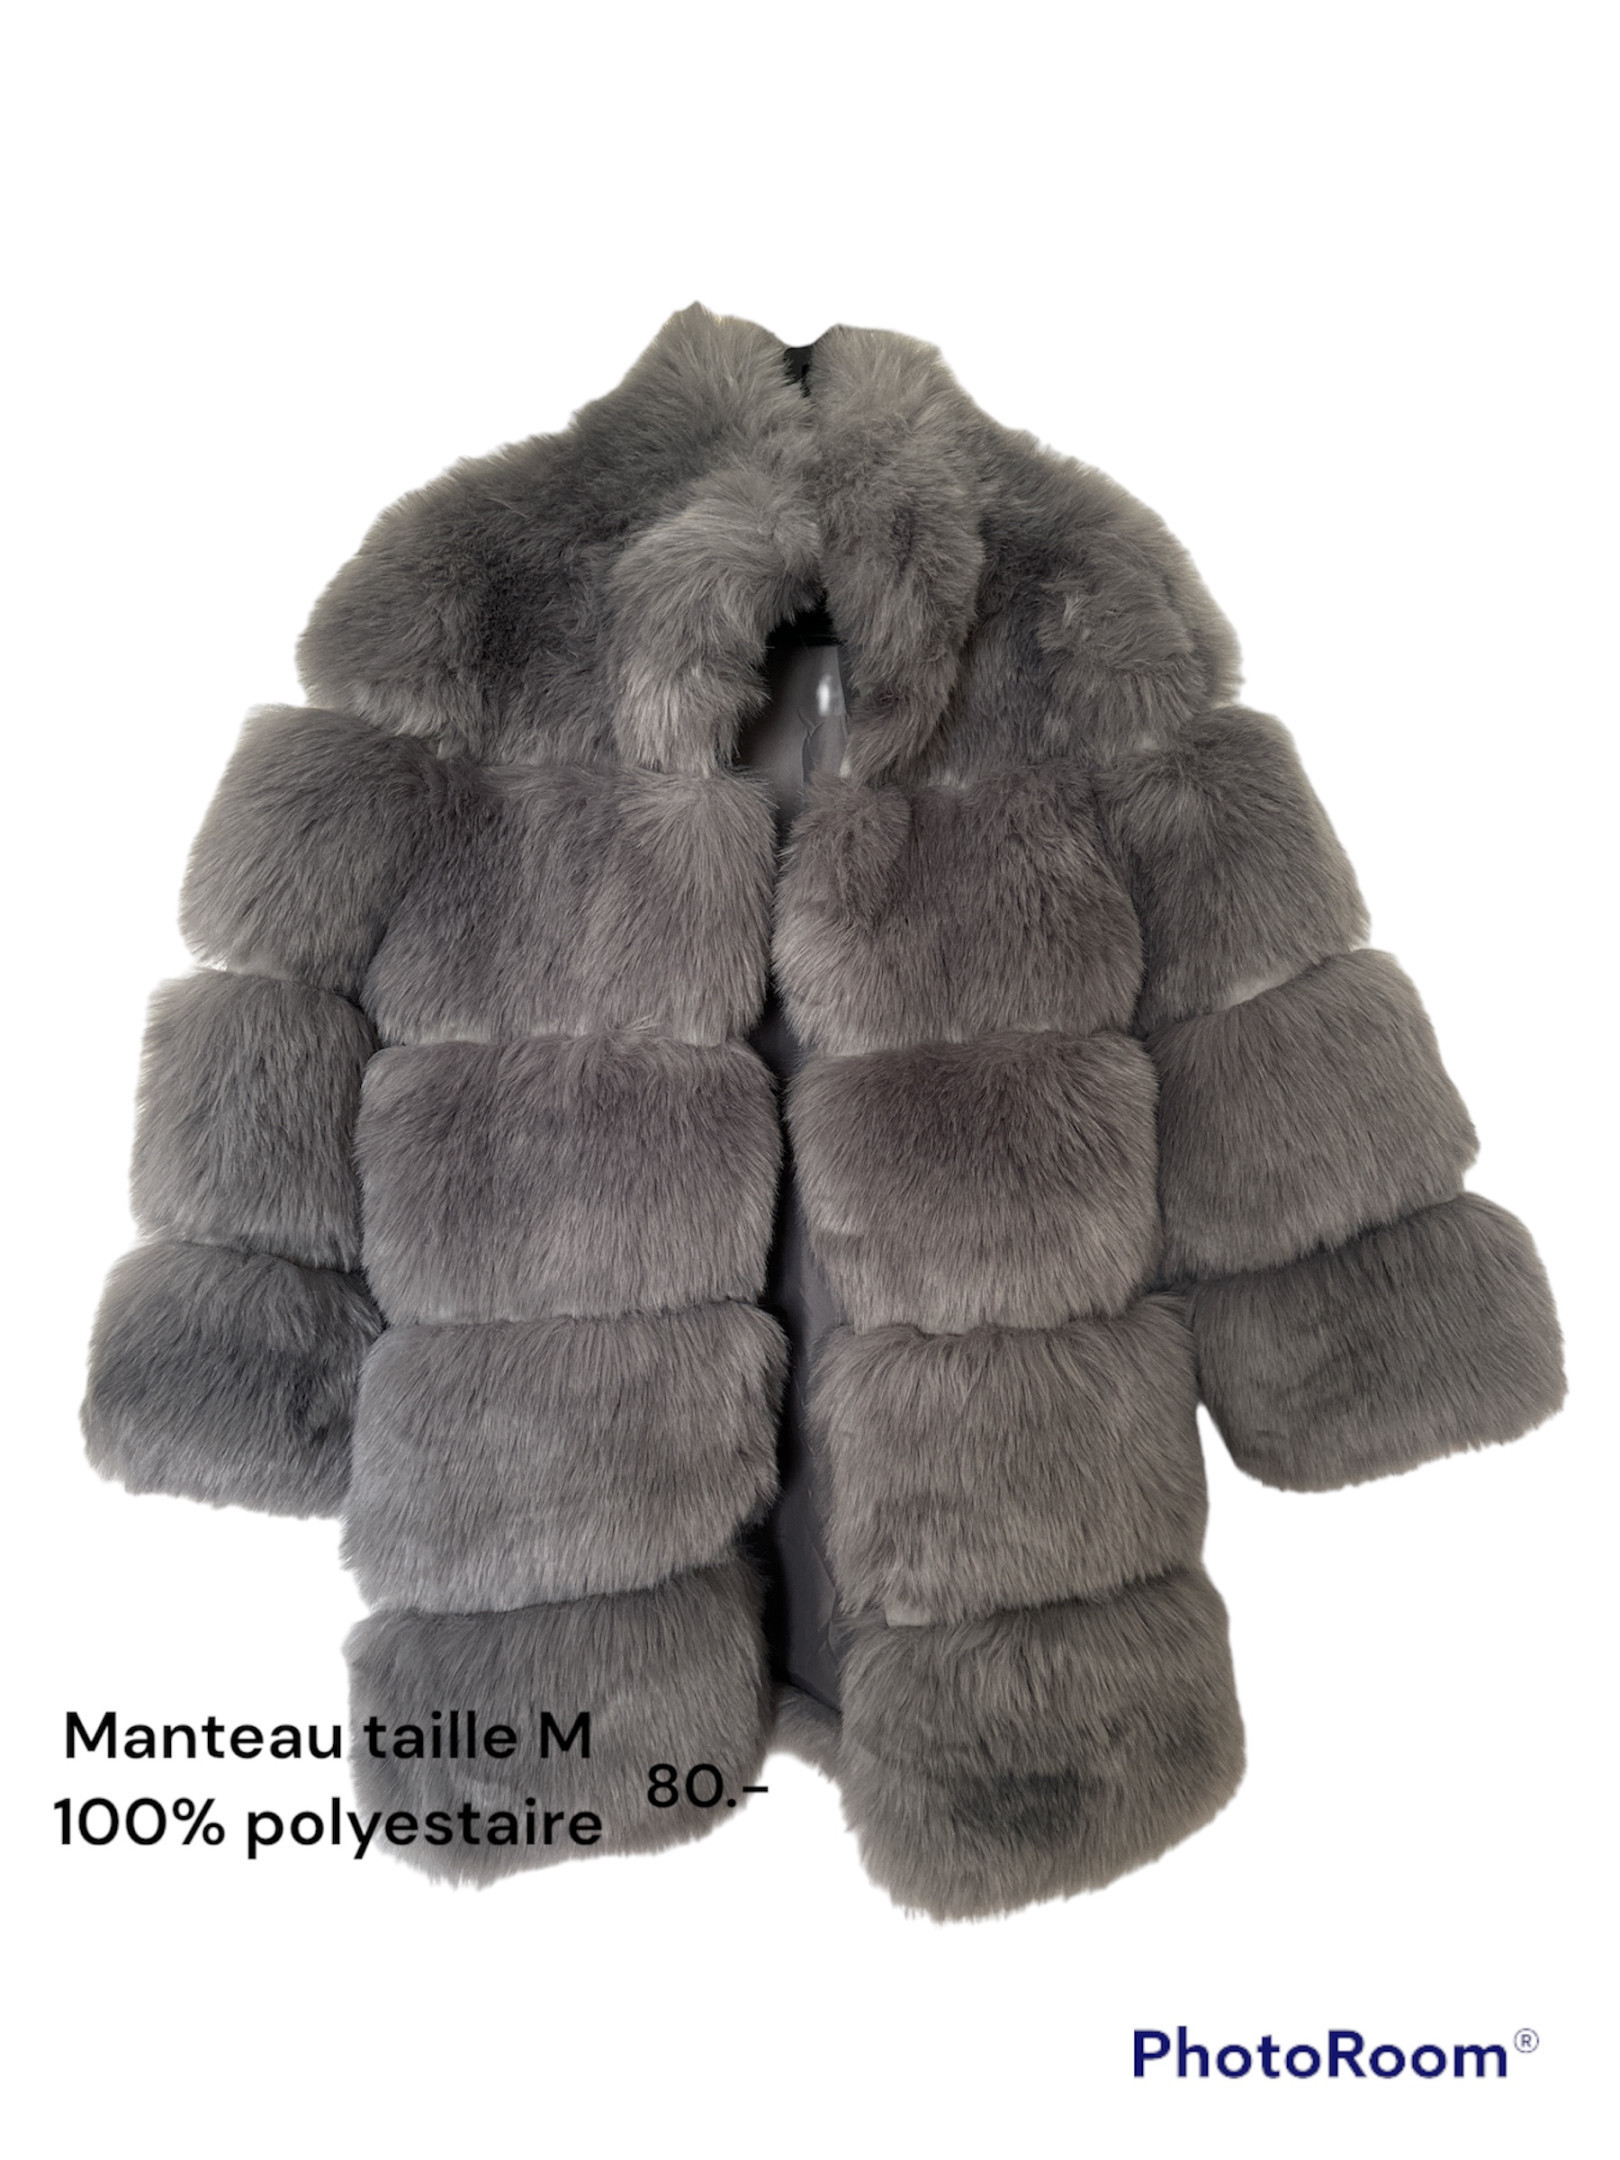 Manteau polyestaire